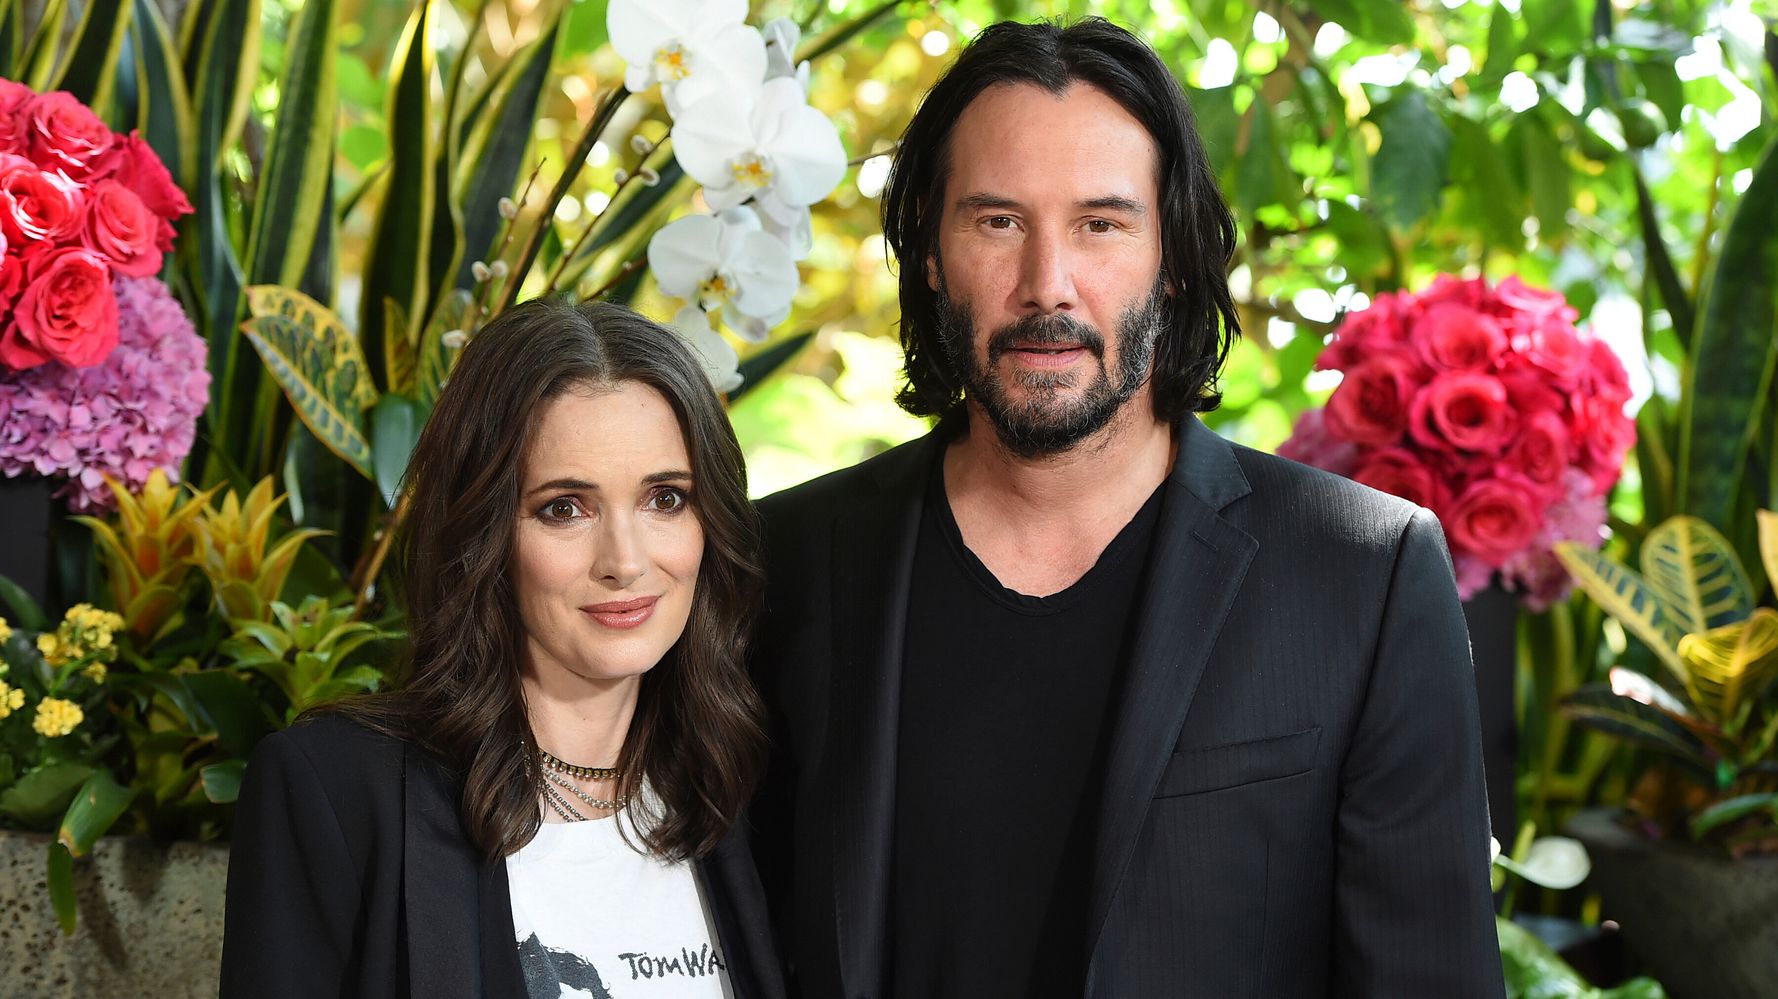 Keanu Reeves Says He's Been Married To Winona Ryder For Almost 30 Years - HuffPost